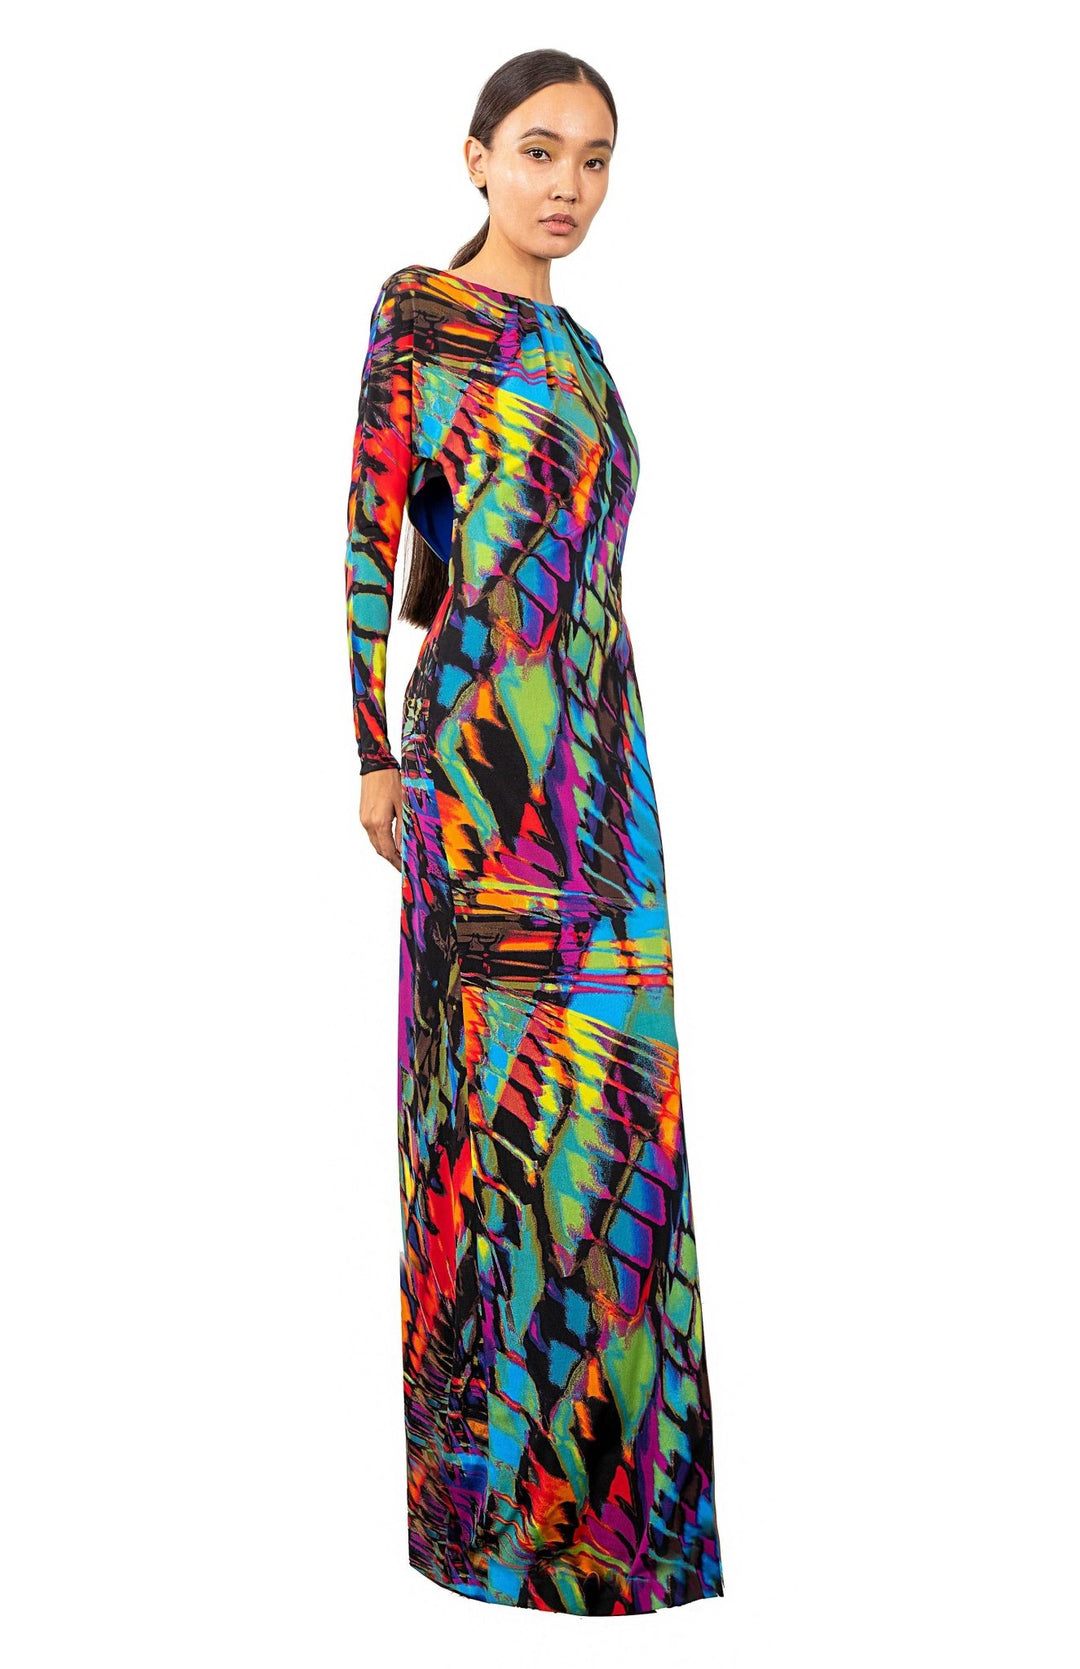 elegant, printed, long sleeve long dress, with back cutout detail in bright colored jersey knit